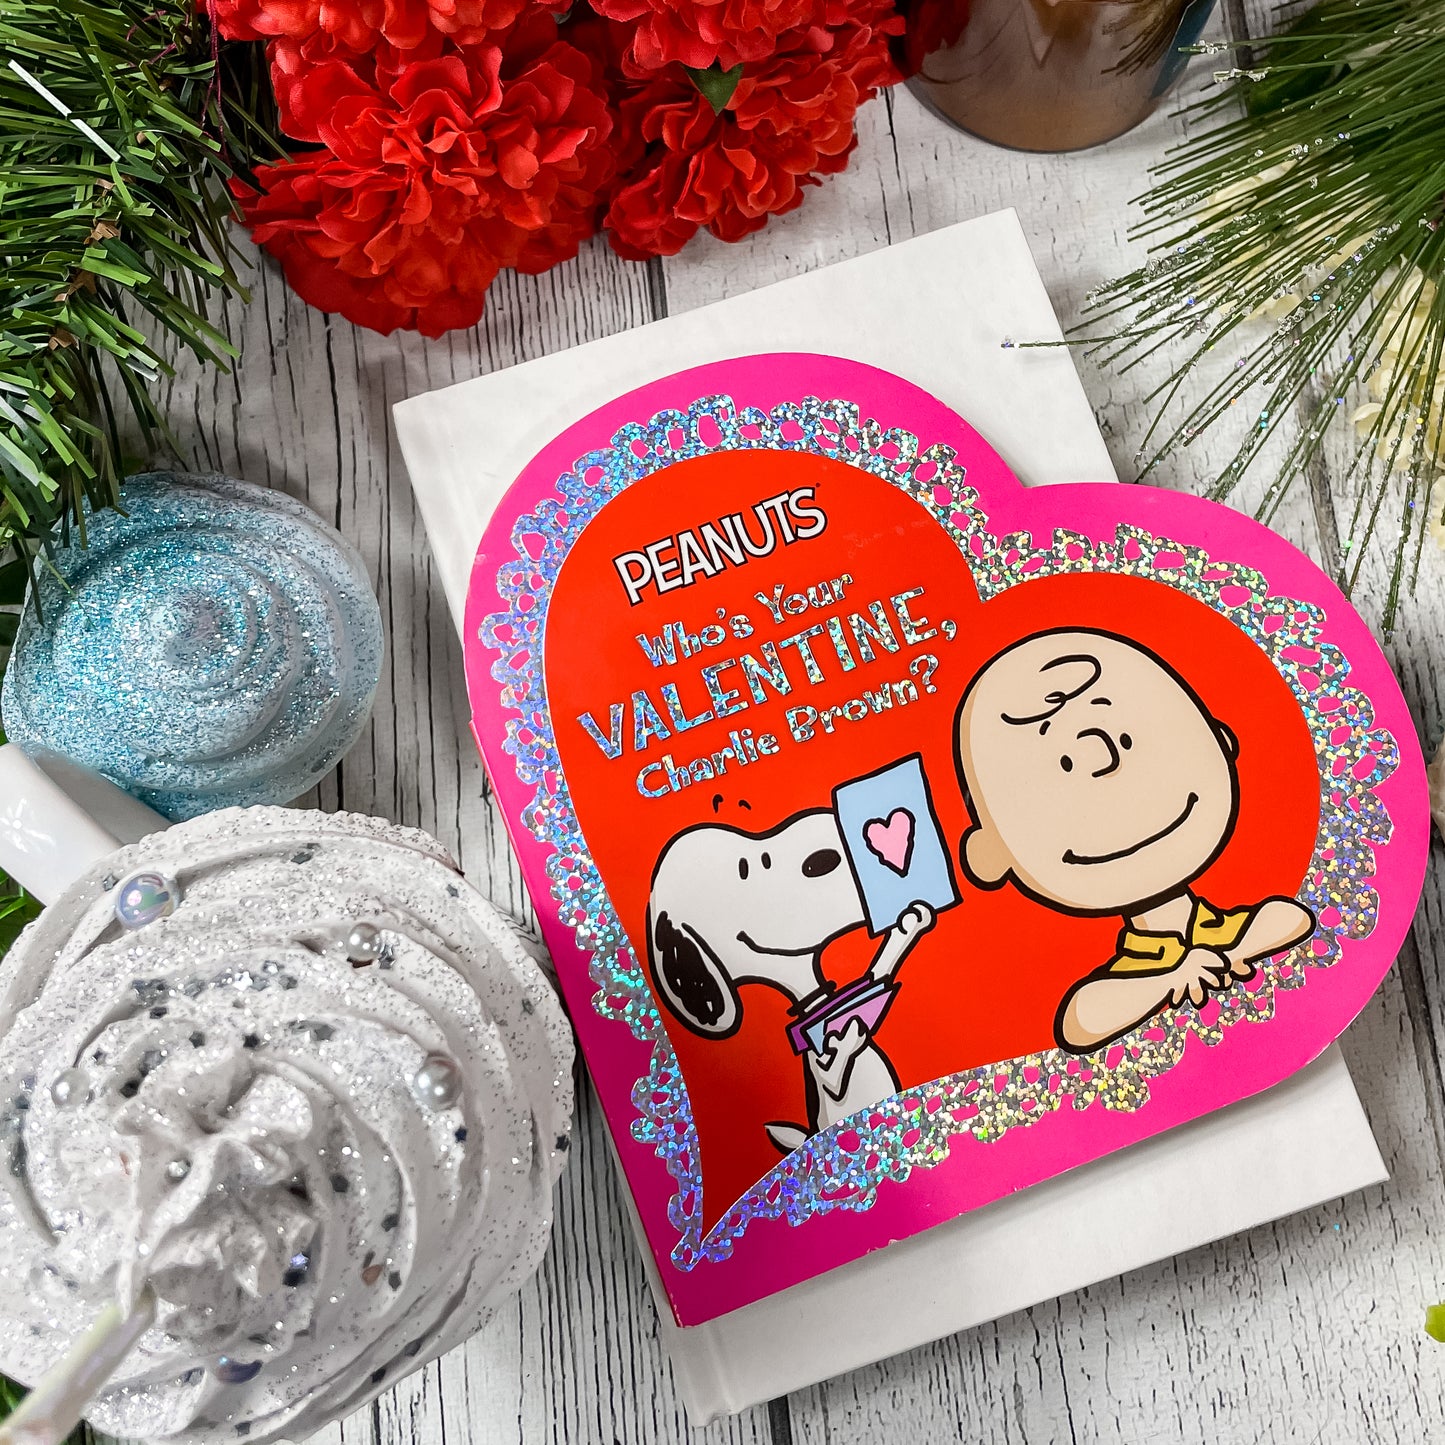 Who's Your Valentine, Charlie Brown? (Peanuts) by Charles M. Schulz